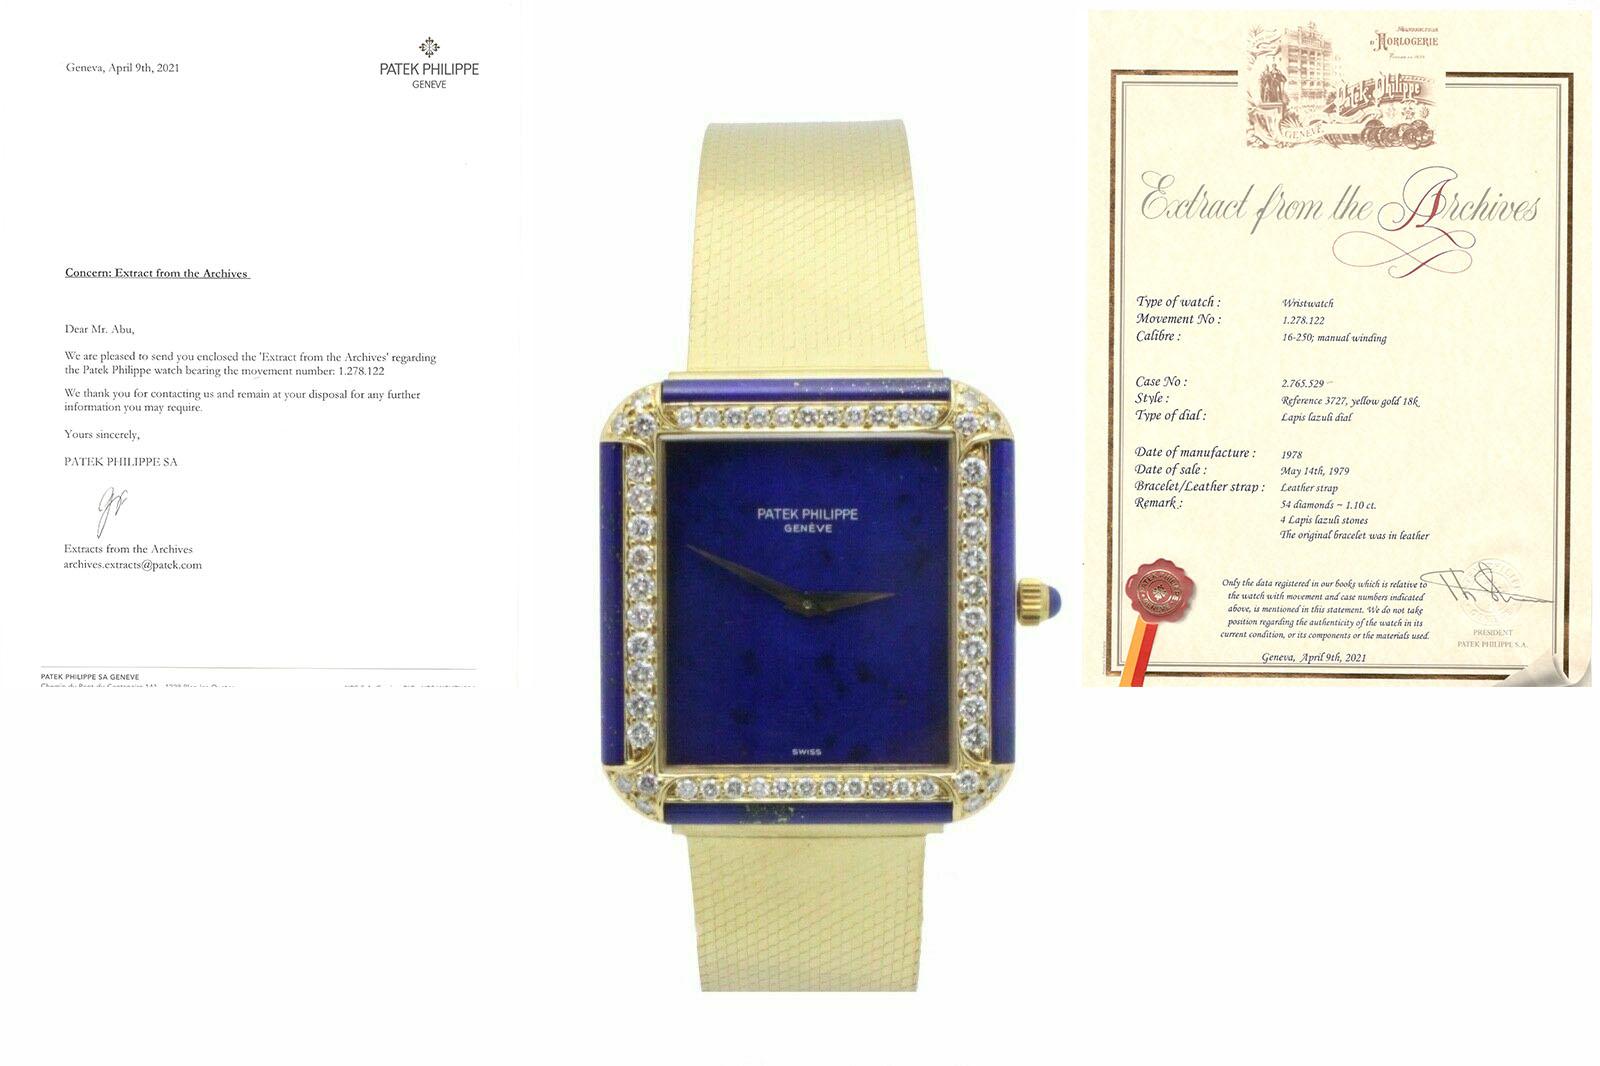 Style Number: 3727



Year: 1970's

 

Case Material: 18K Yellow Gold

 

Band: Custom 18K Yellow Gold Band

 

Bezel:  Lapis Lazuli Diamond Bezel Approx 1.17ctw 

 

Dial: Lapis Lazuli 

 

Face: Sapphire Crystal 

 

Case Size: 30mm

 

Includes: